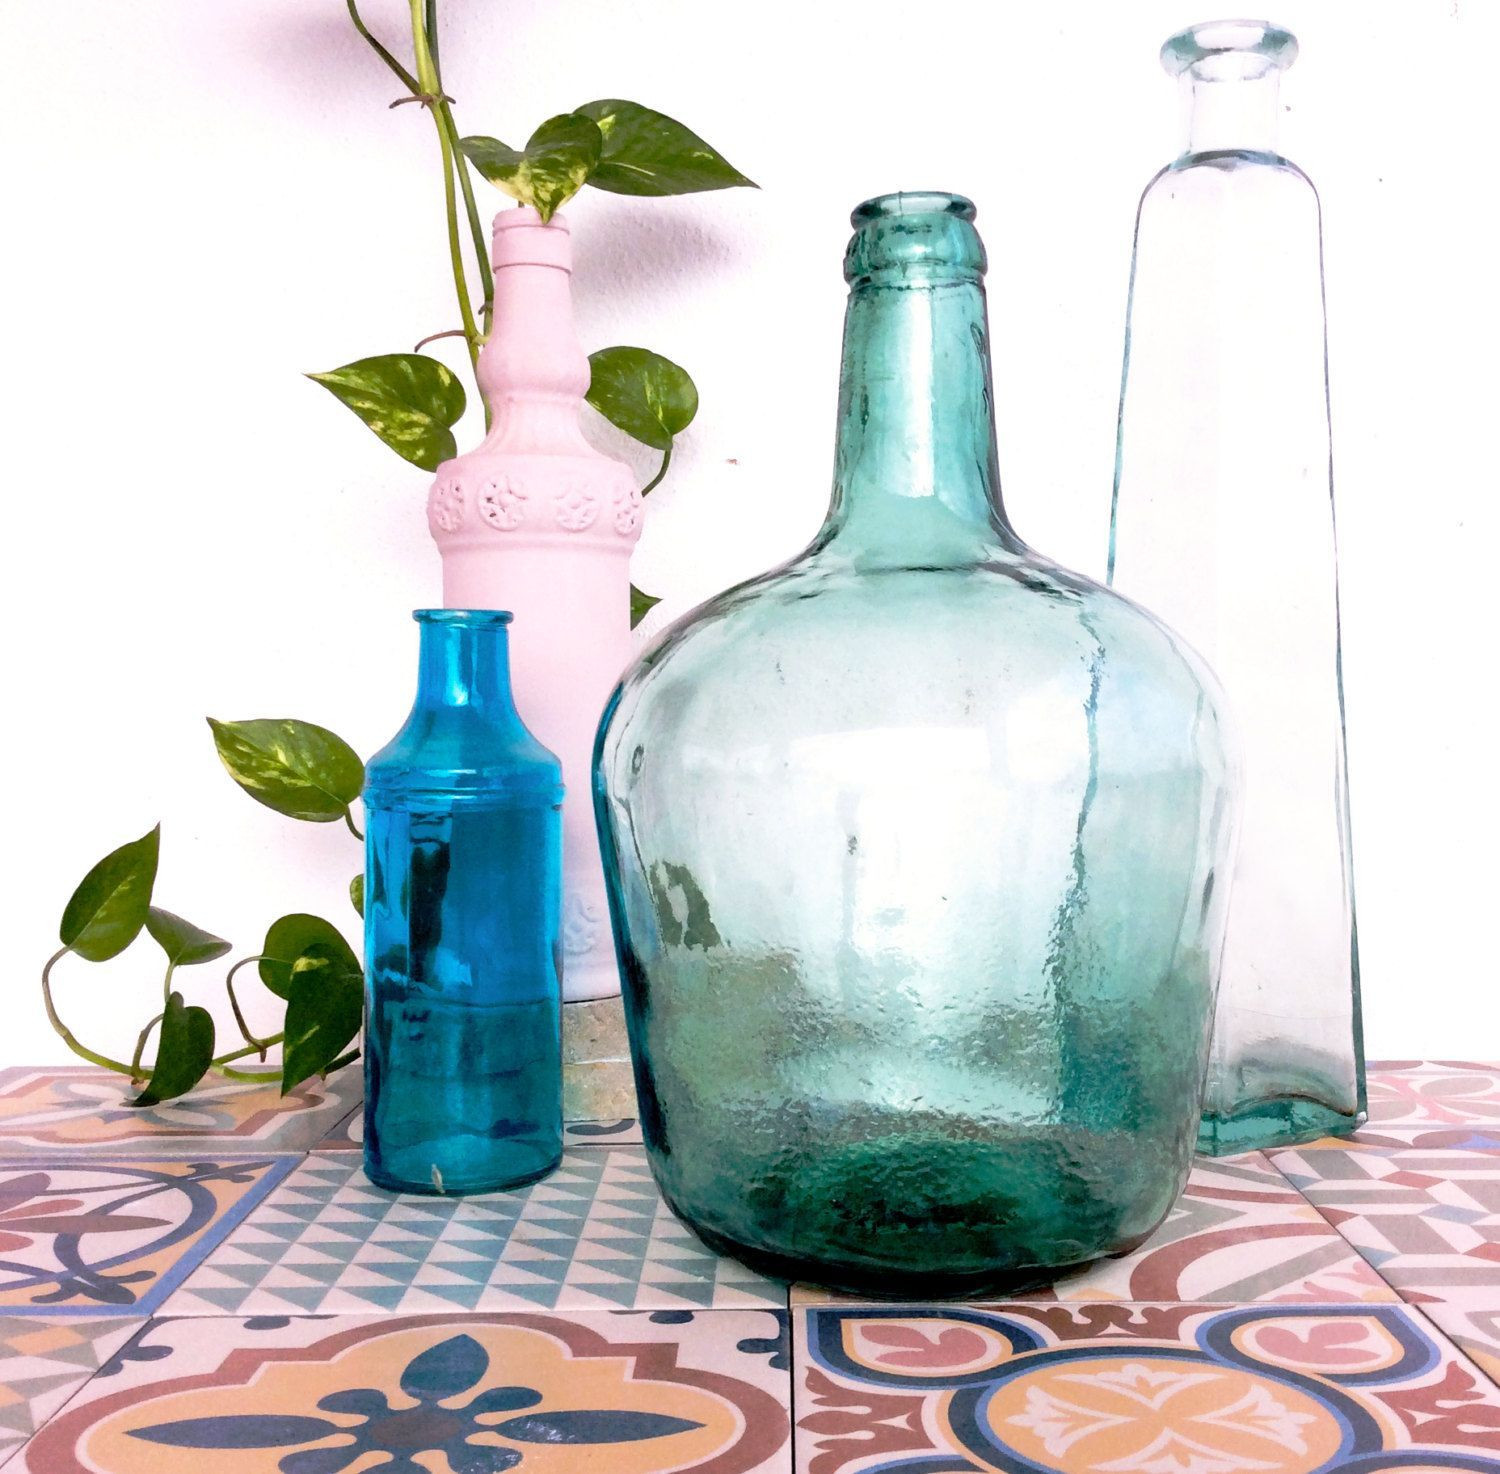 16 Famous Green Glass Bottle Vase 2022 free download green glass bottle vase of 35 antique green glass vases the weekly world pertaining to vintage viresa demijohn green glass bottle from spain by noaparis